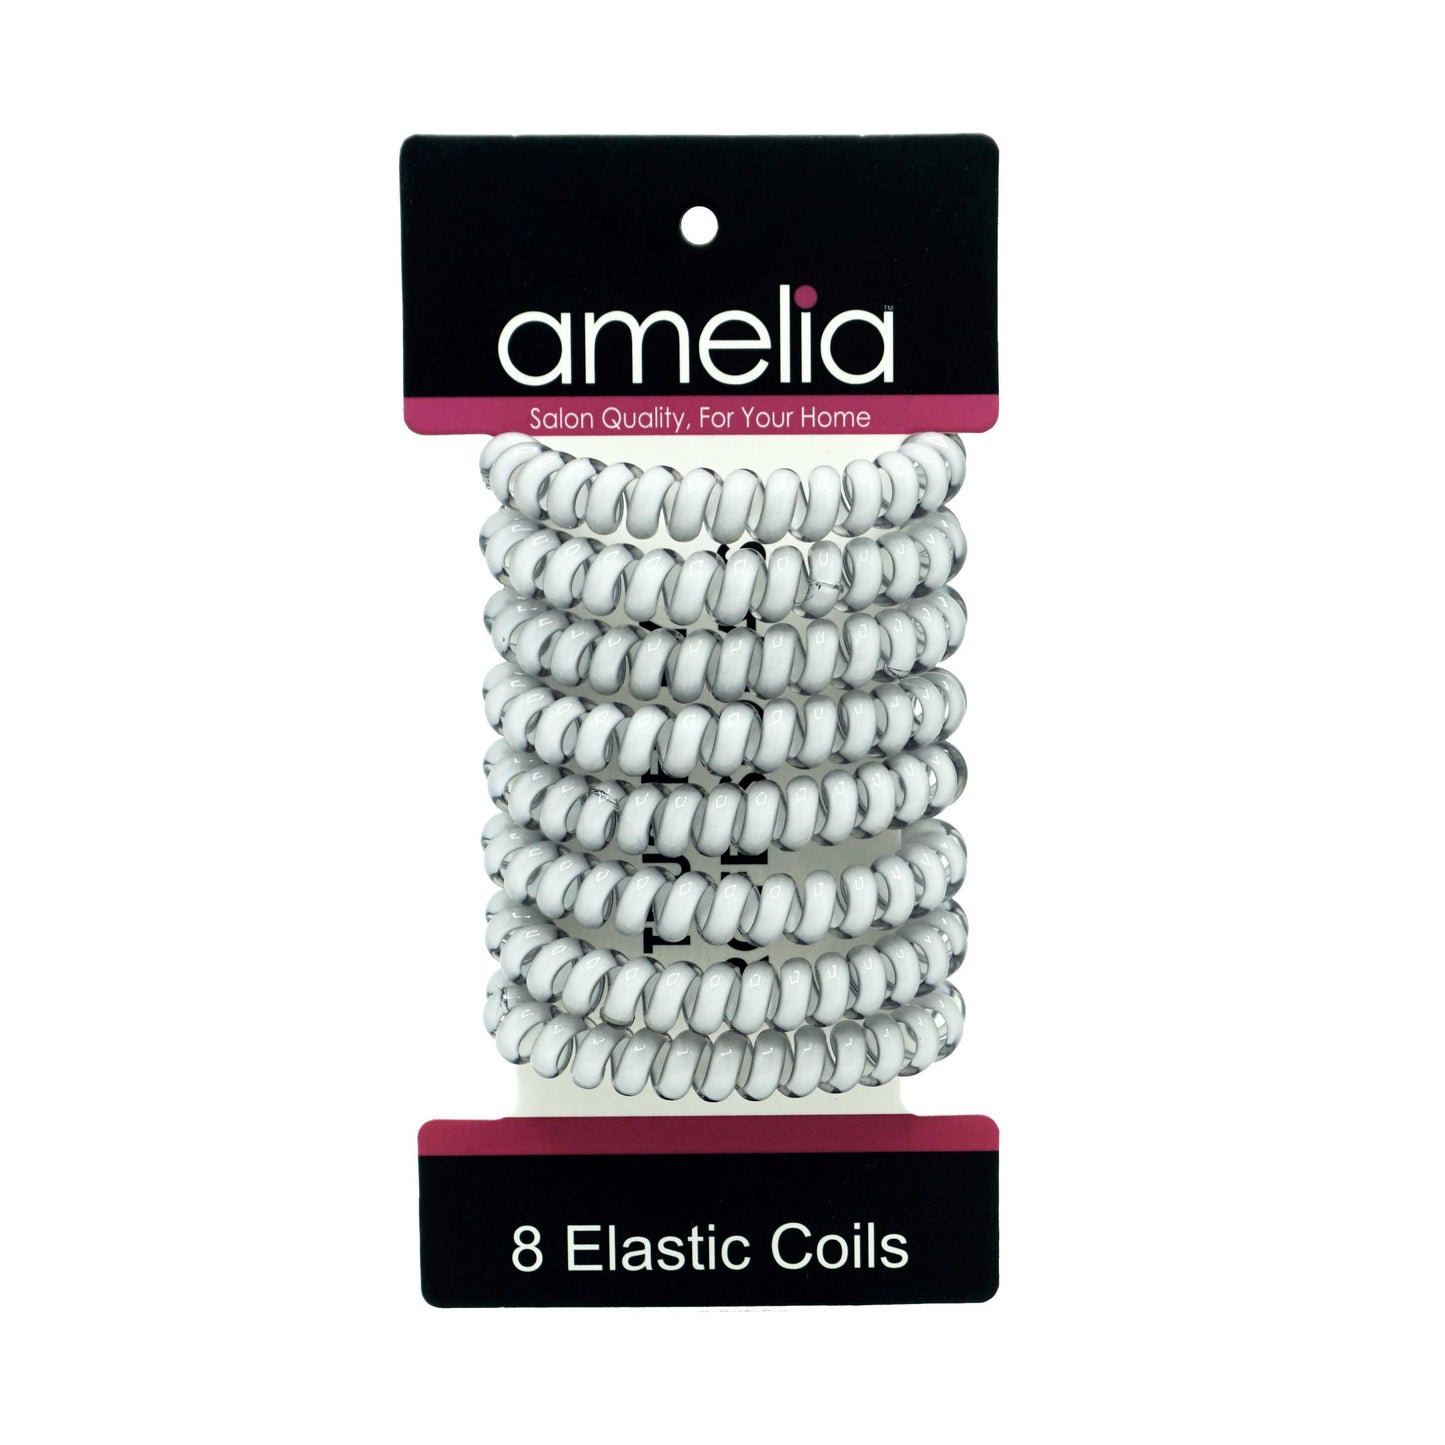 Amelia Beauty Products 8 Medium Elastic Hair Coils, 2.0in Diameter Thick Spiral Hair Ties, Gentle on Hair, Strong Hold and Minimizes Dents and Creases, White